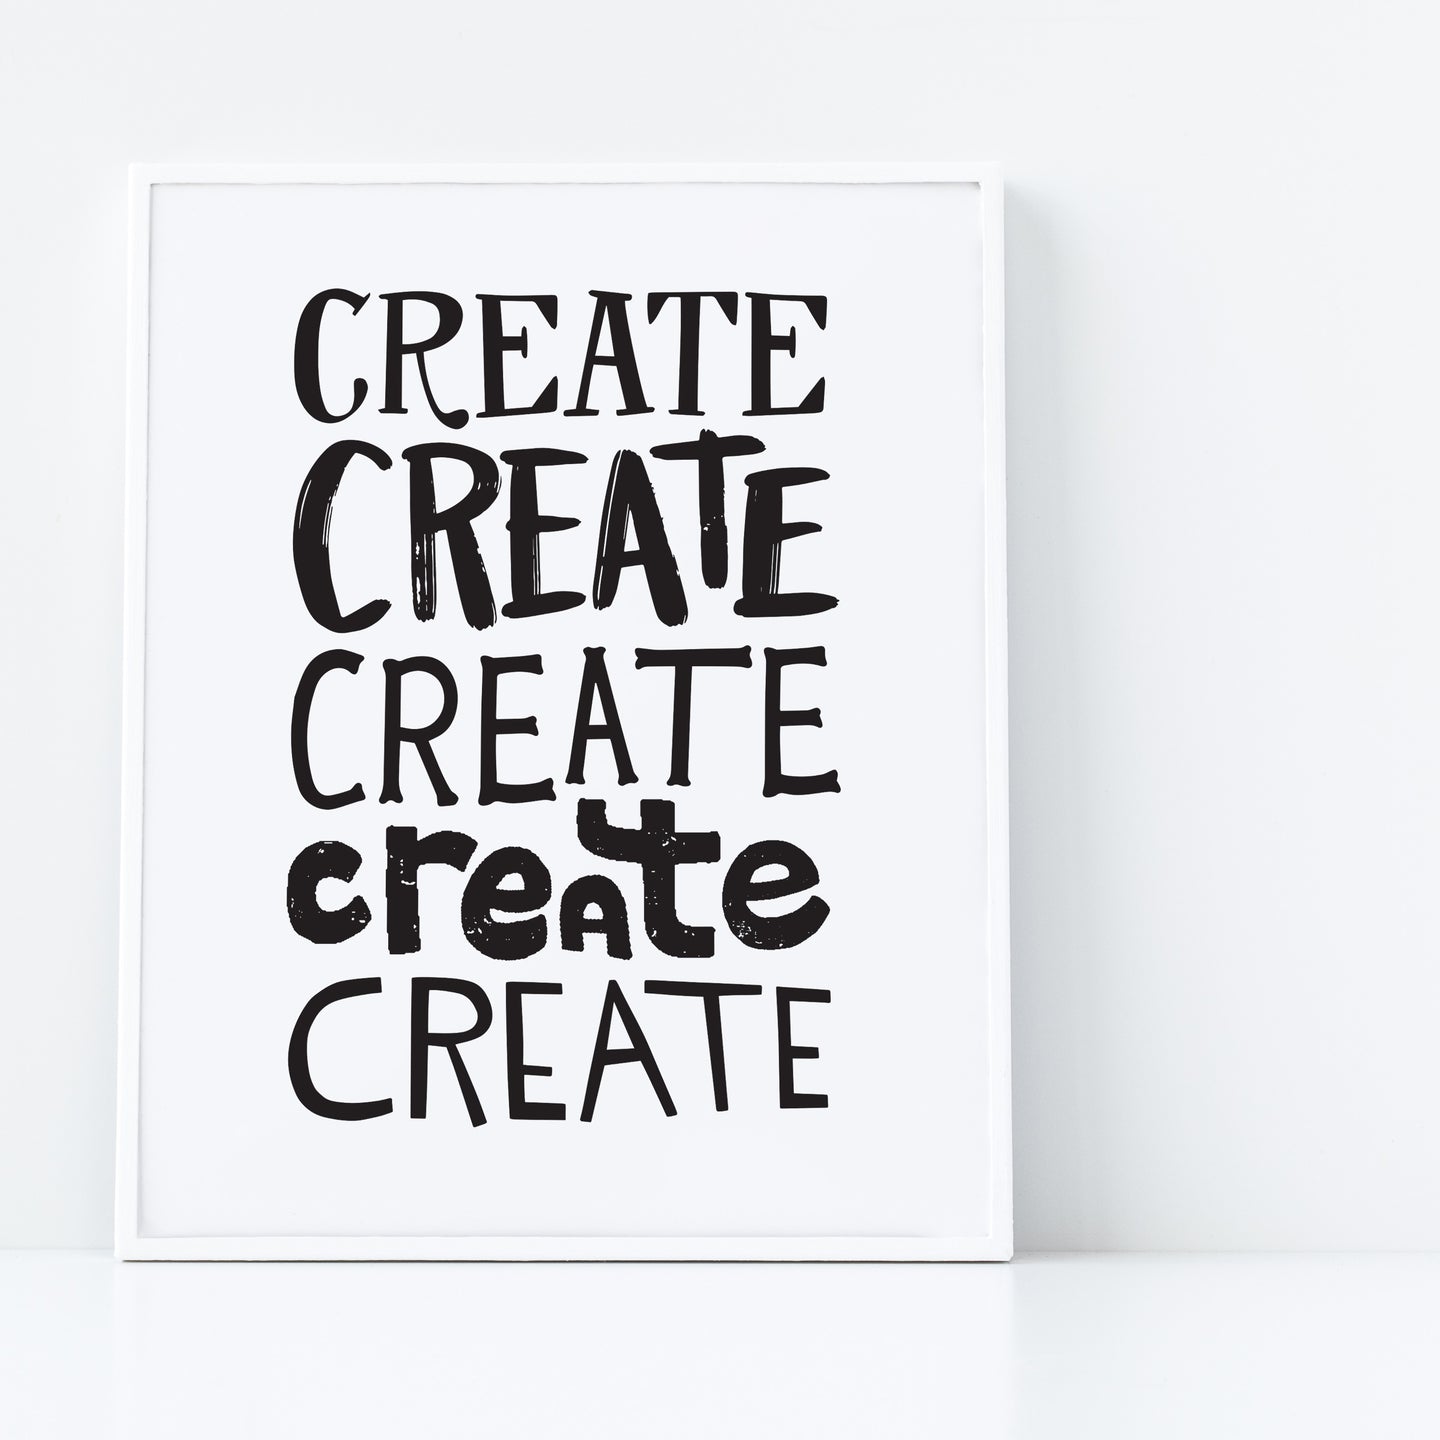 A print featured in a white frame with the word “create” five times in black lettering. 